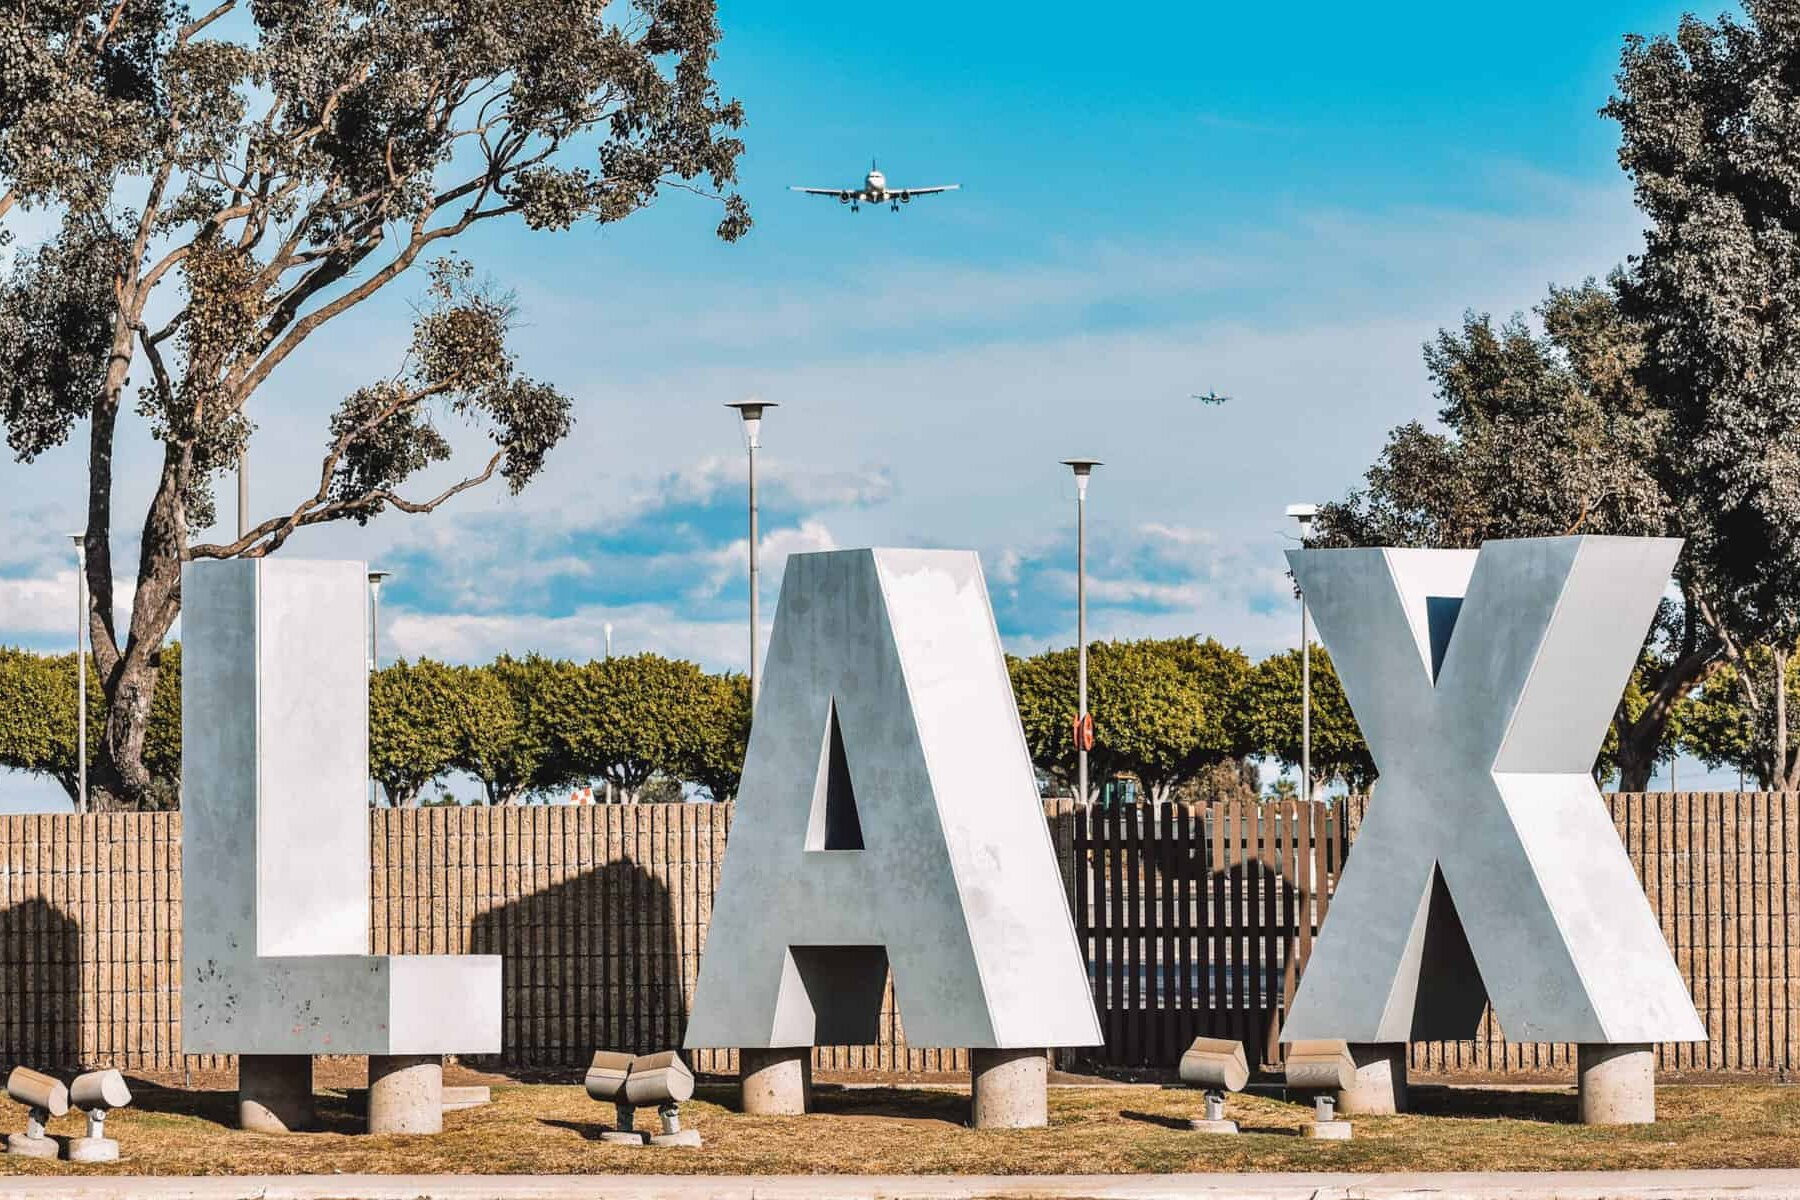 A shot of an aircraft taking off right over the LAX sign!